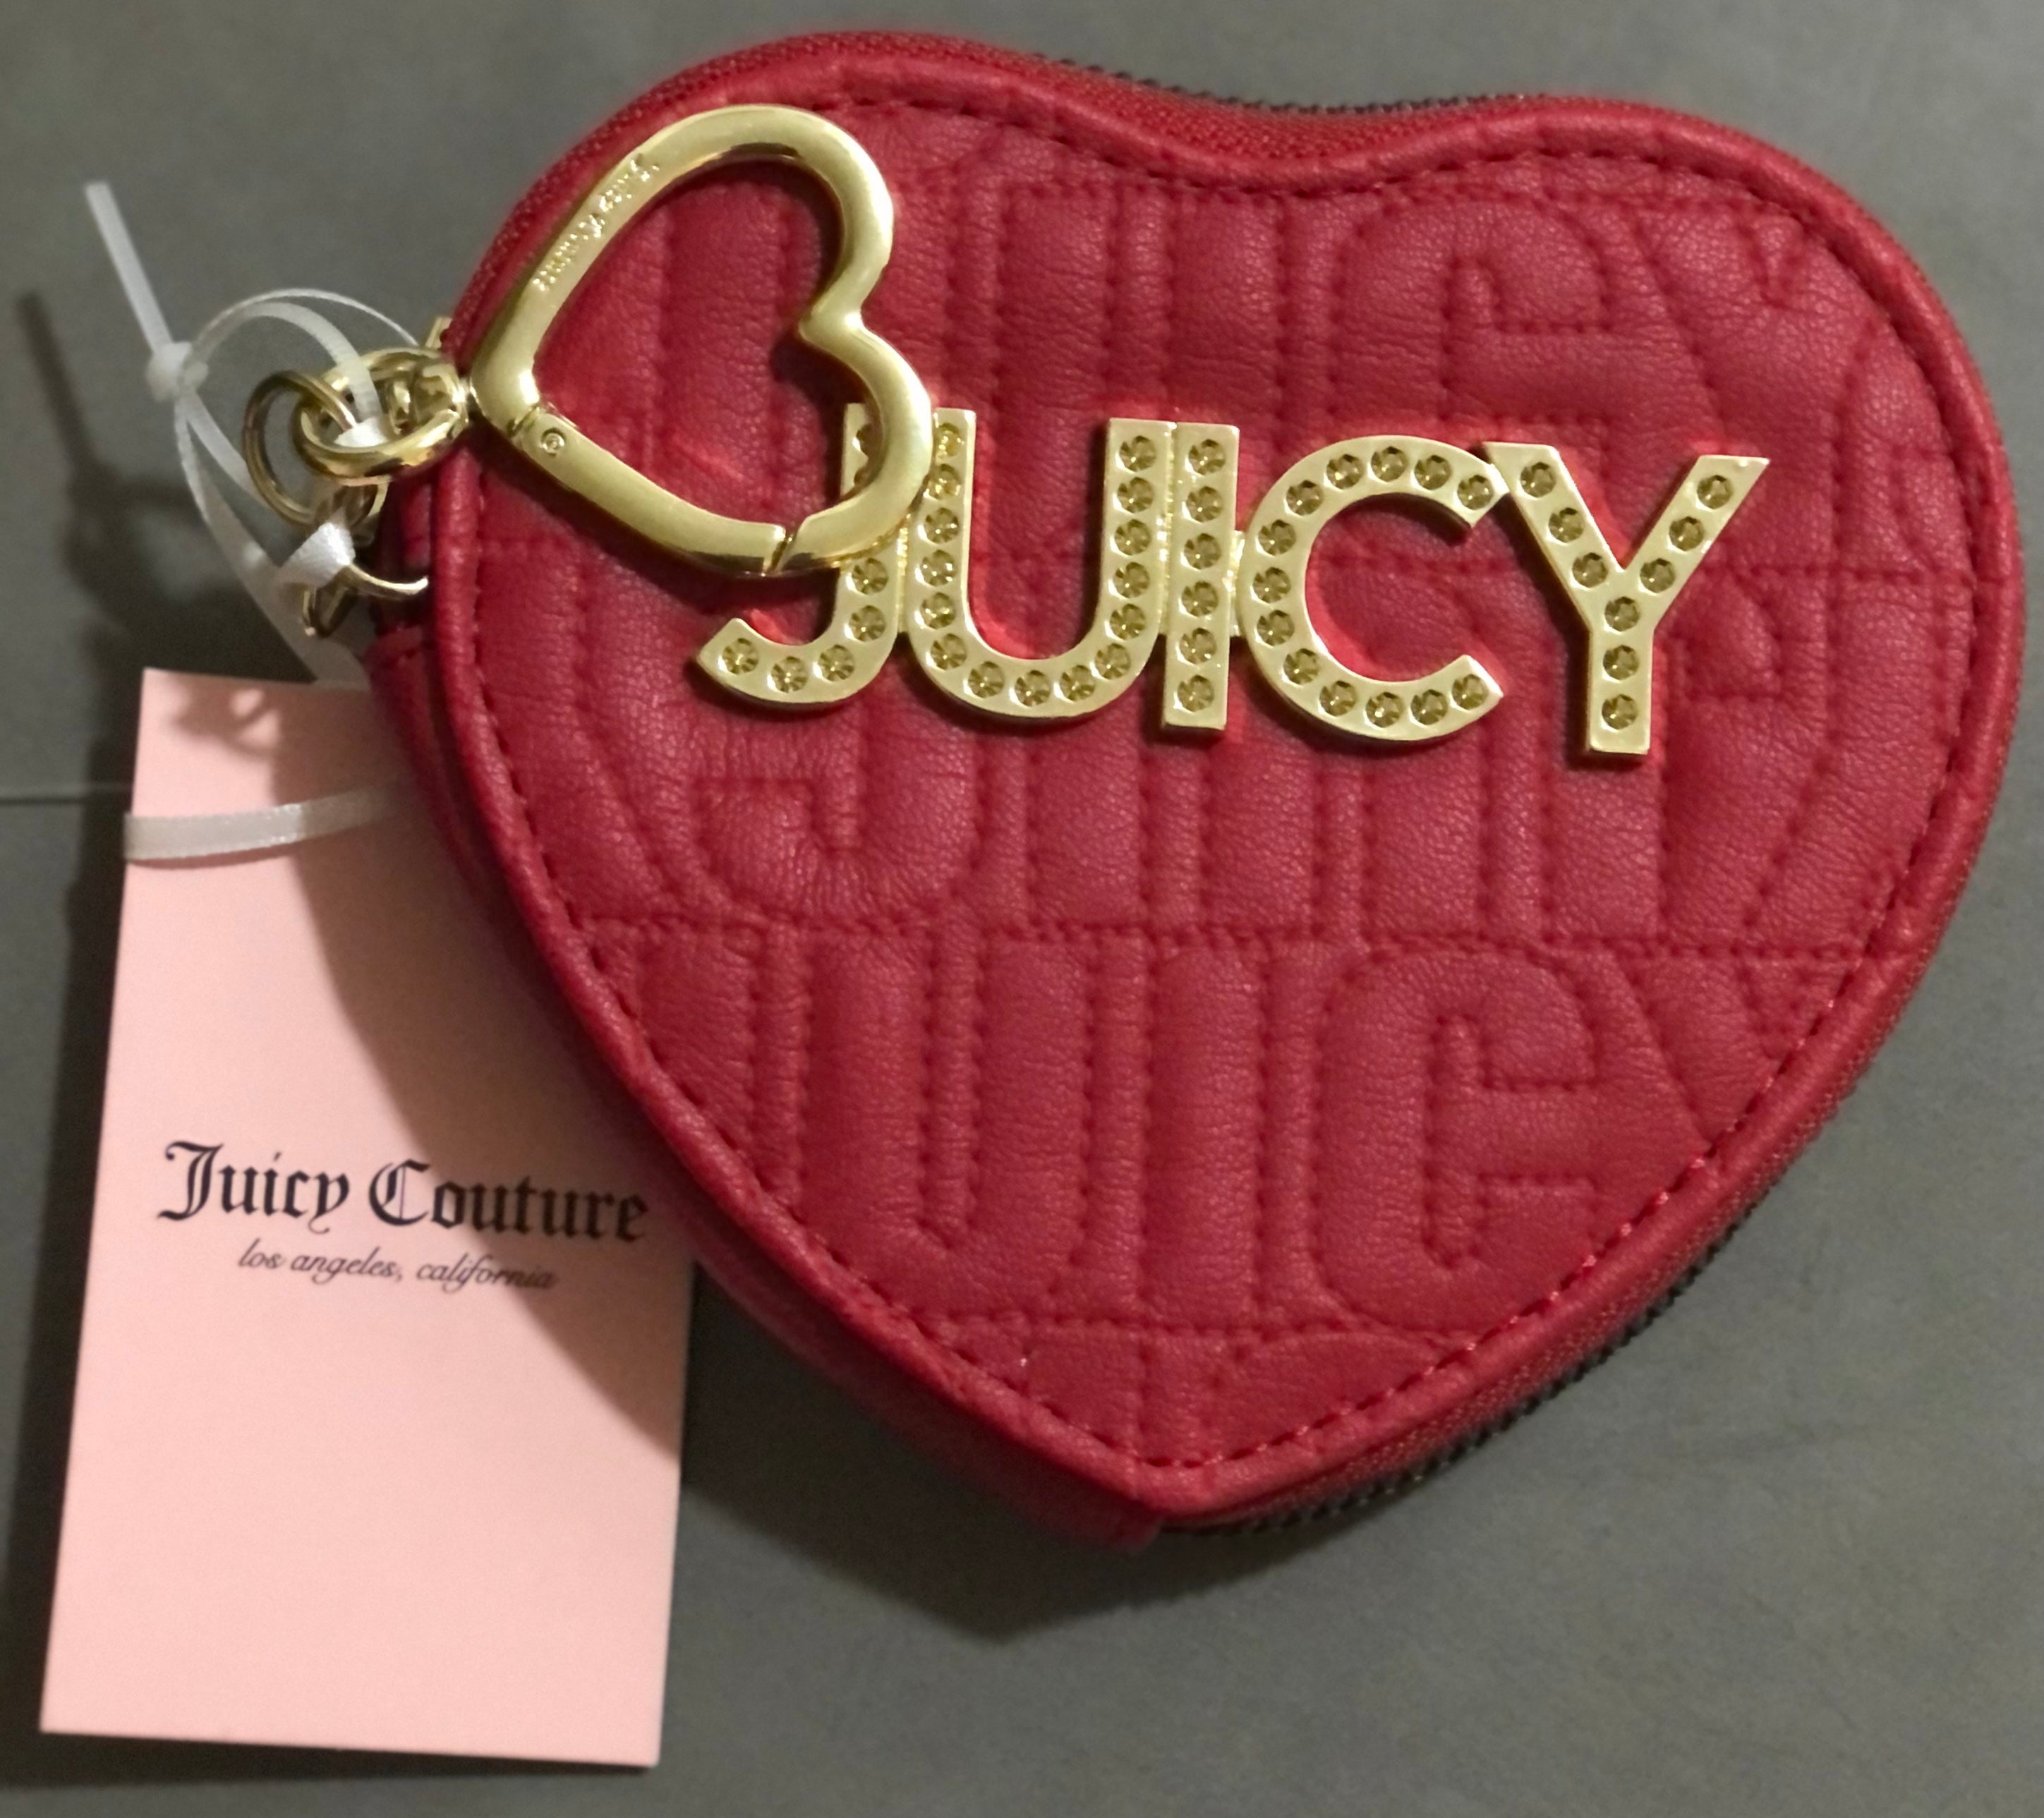 Juicy Couture Coin 🪙 Case 😍 | Juicy couture wallets, Black leather wallet,  Juicy couture